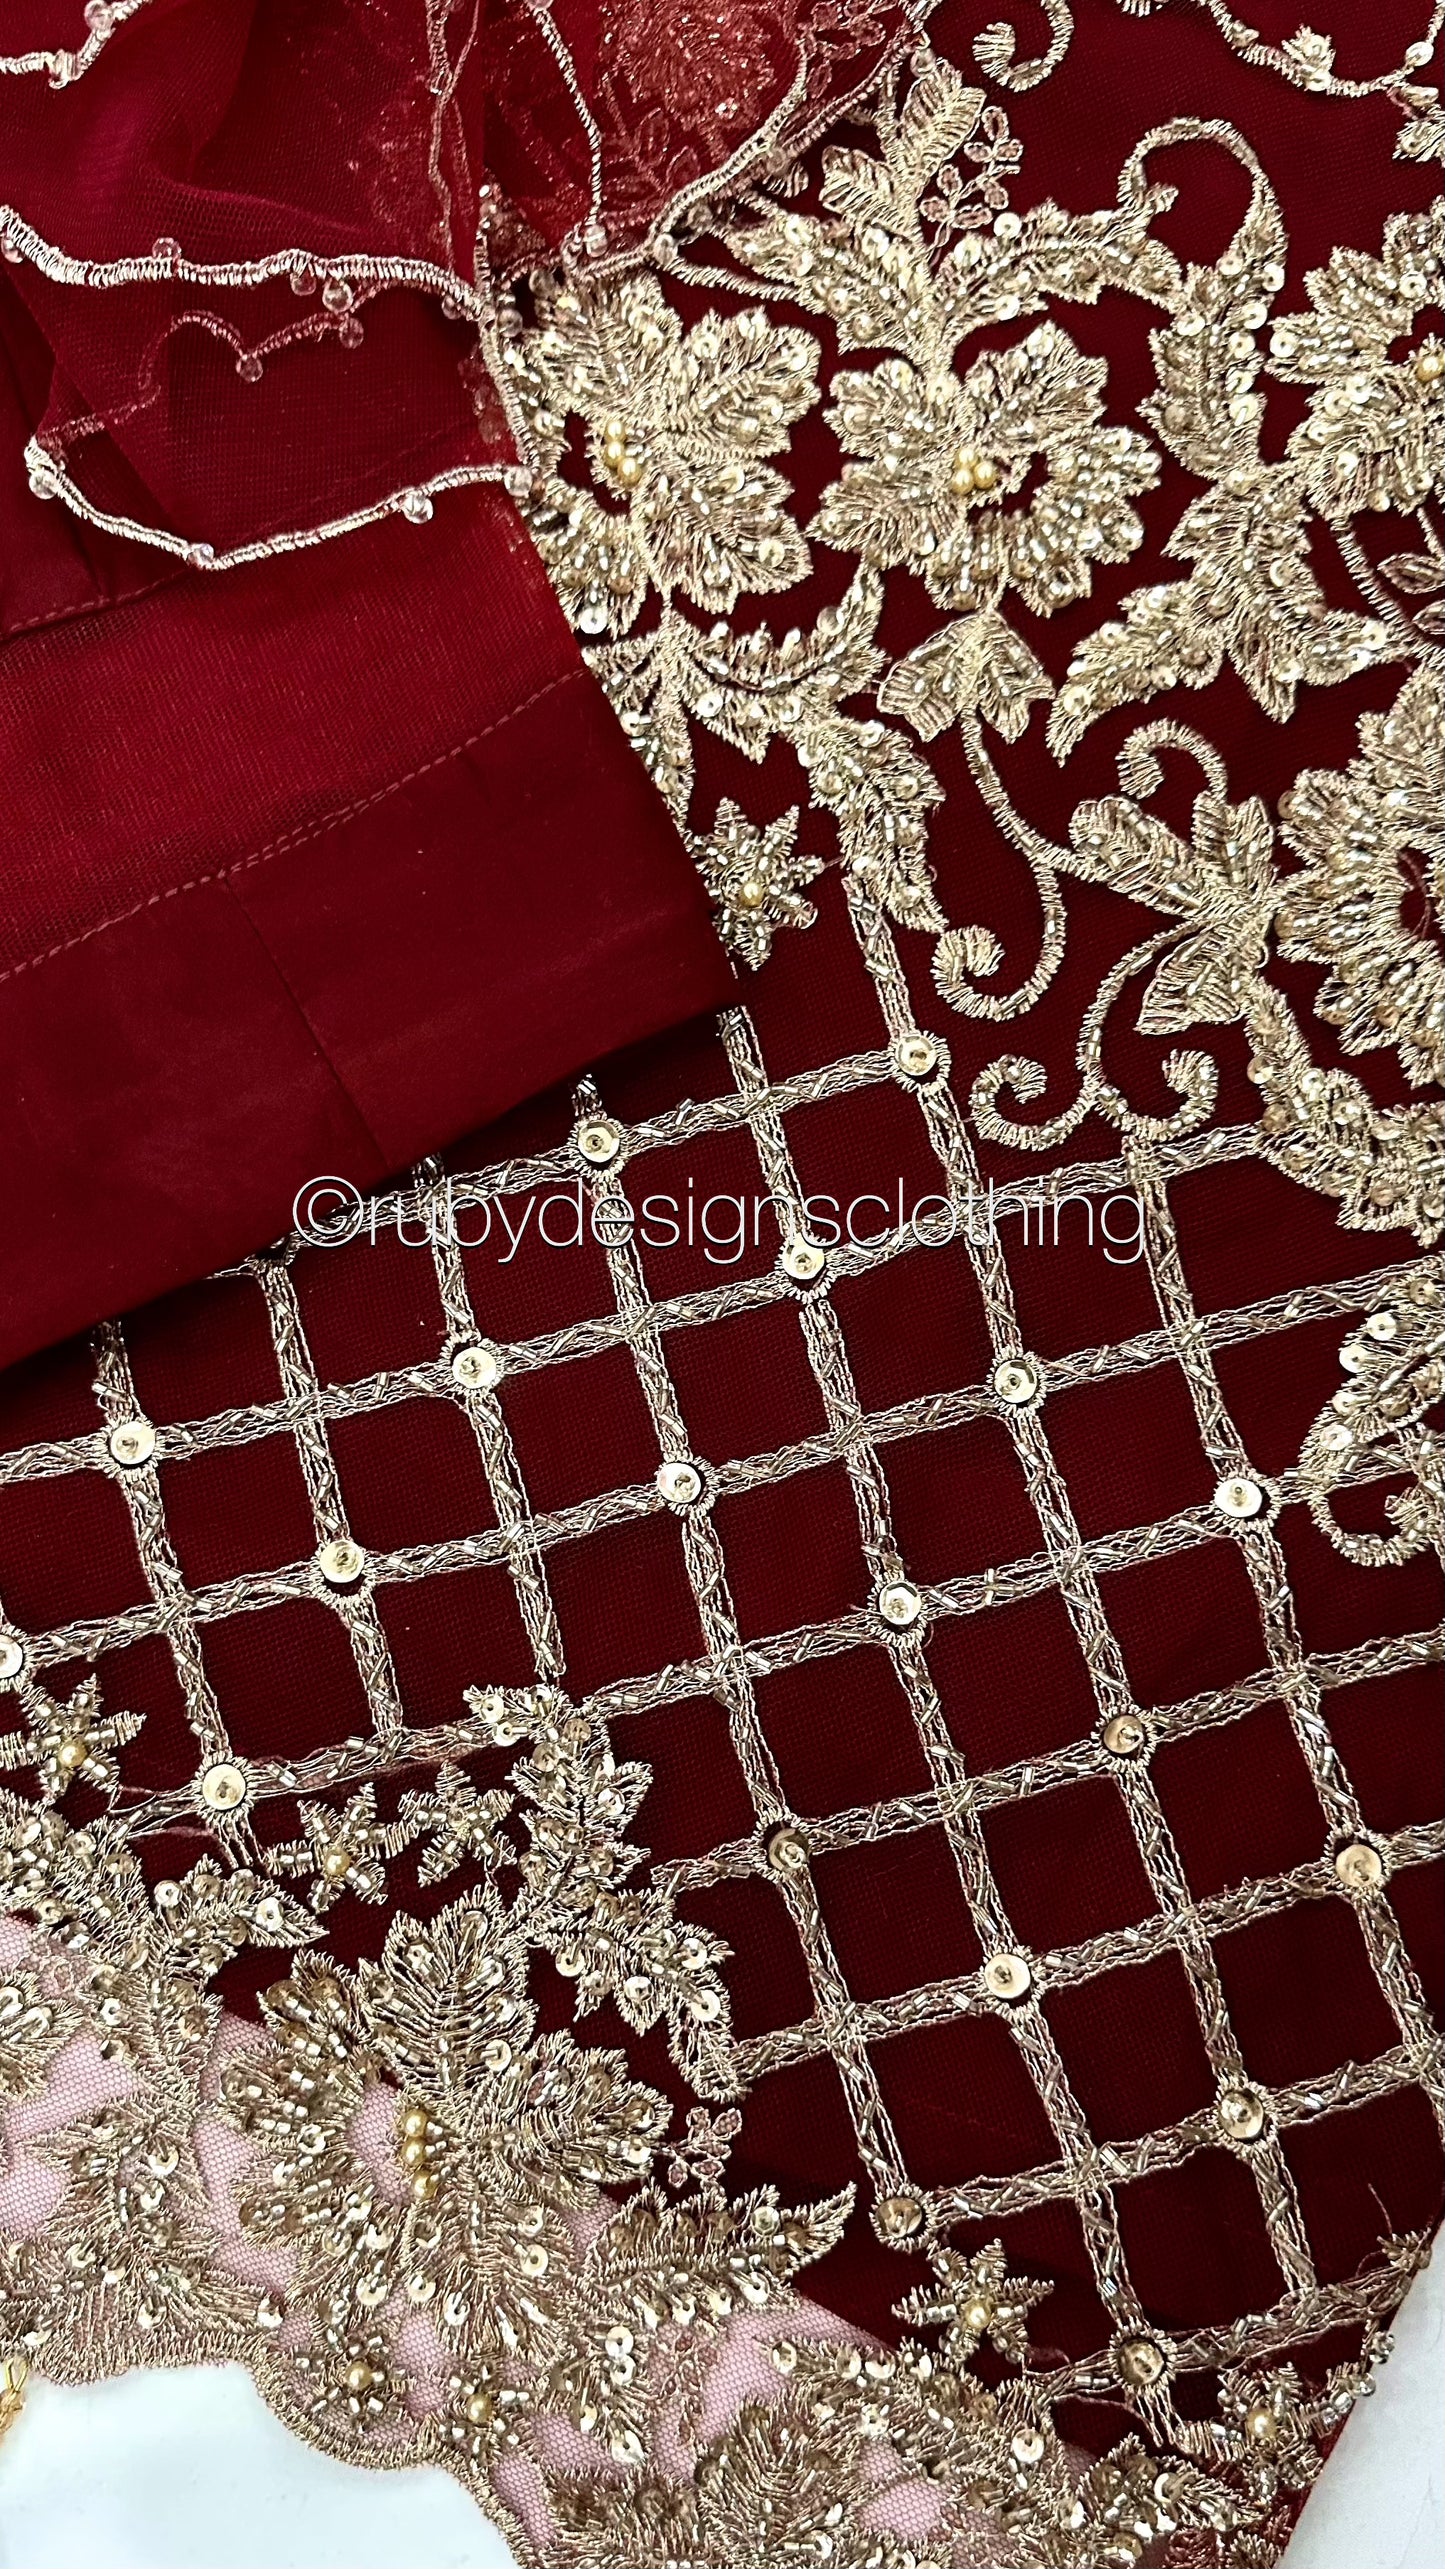 ALARA - 3 Piece Maroon Net Suit with Gold Embroidery